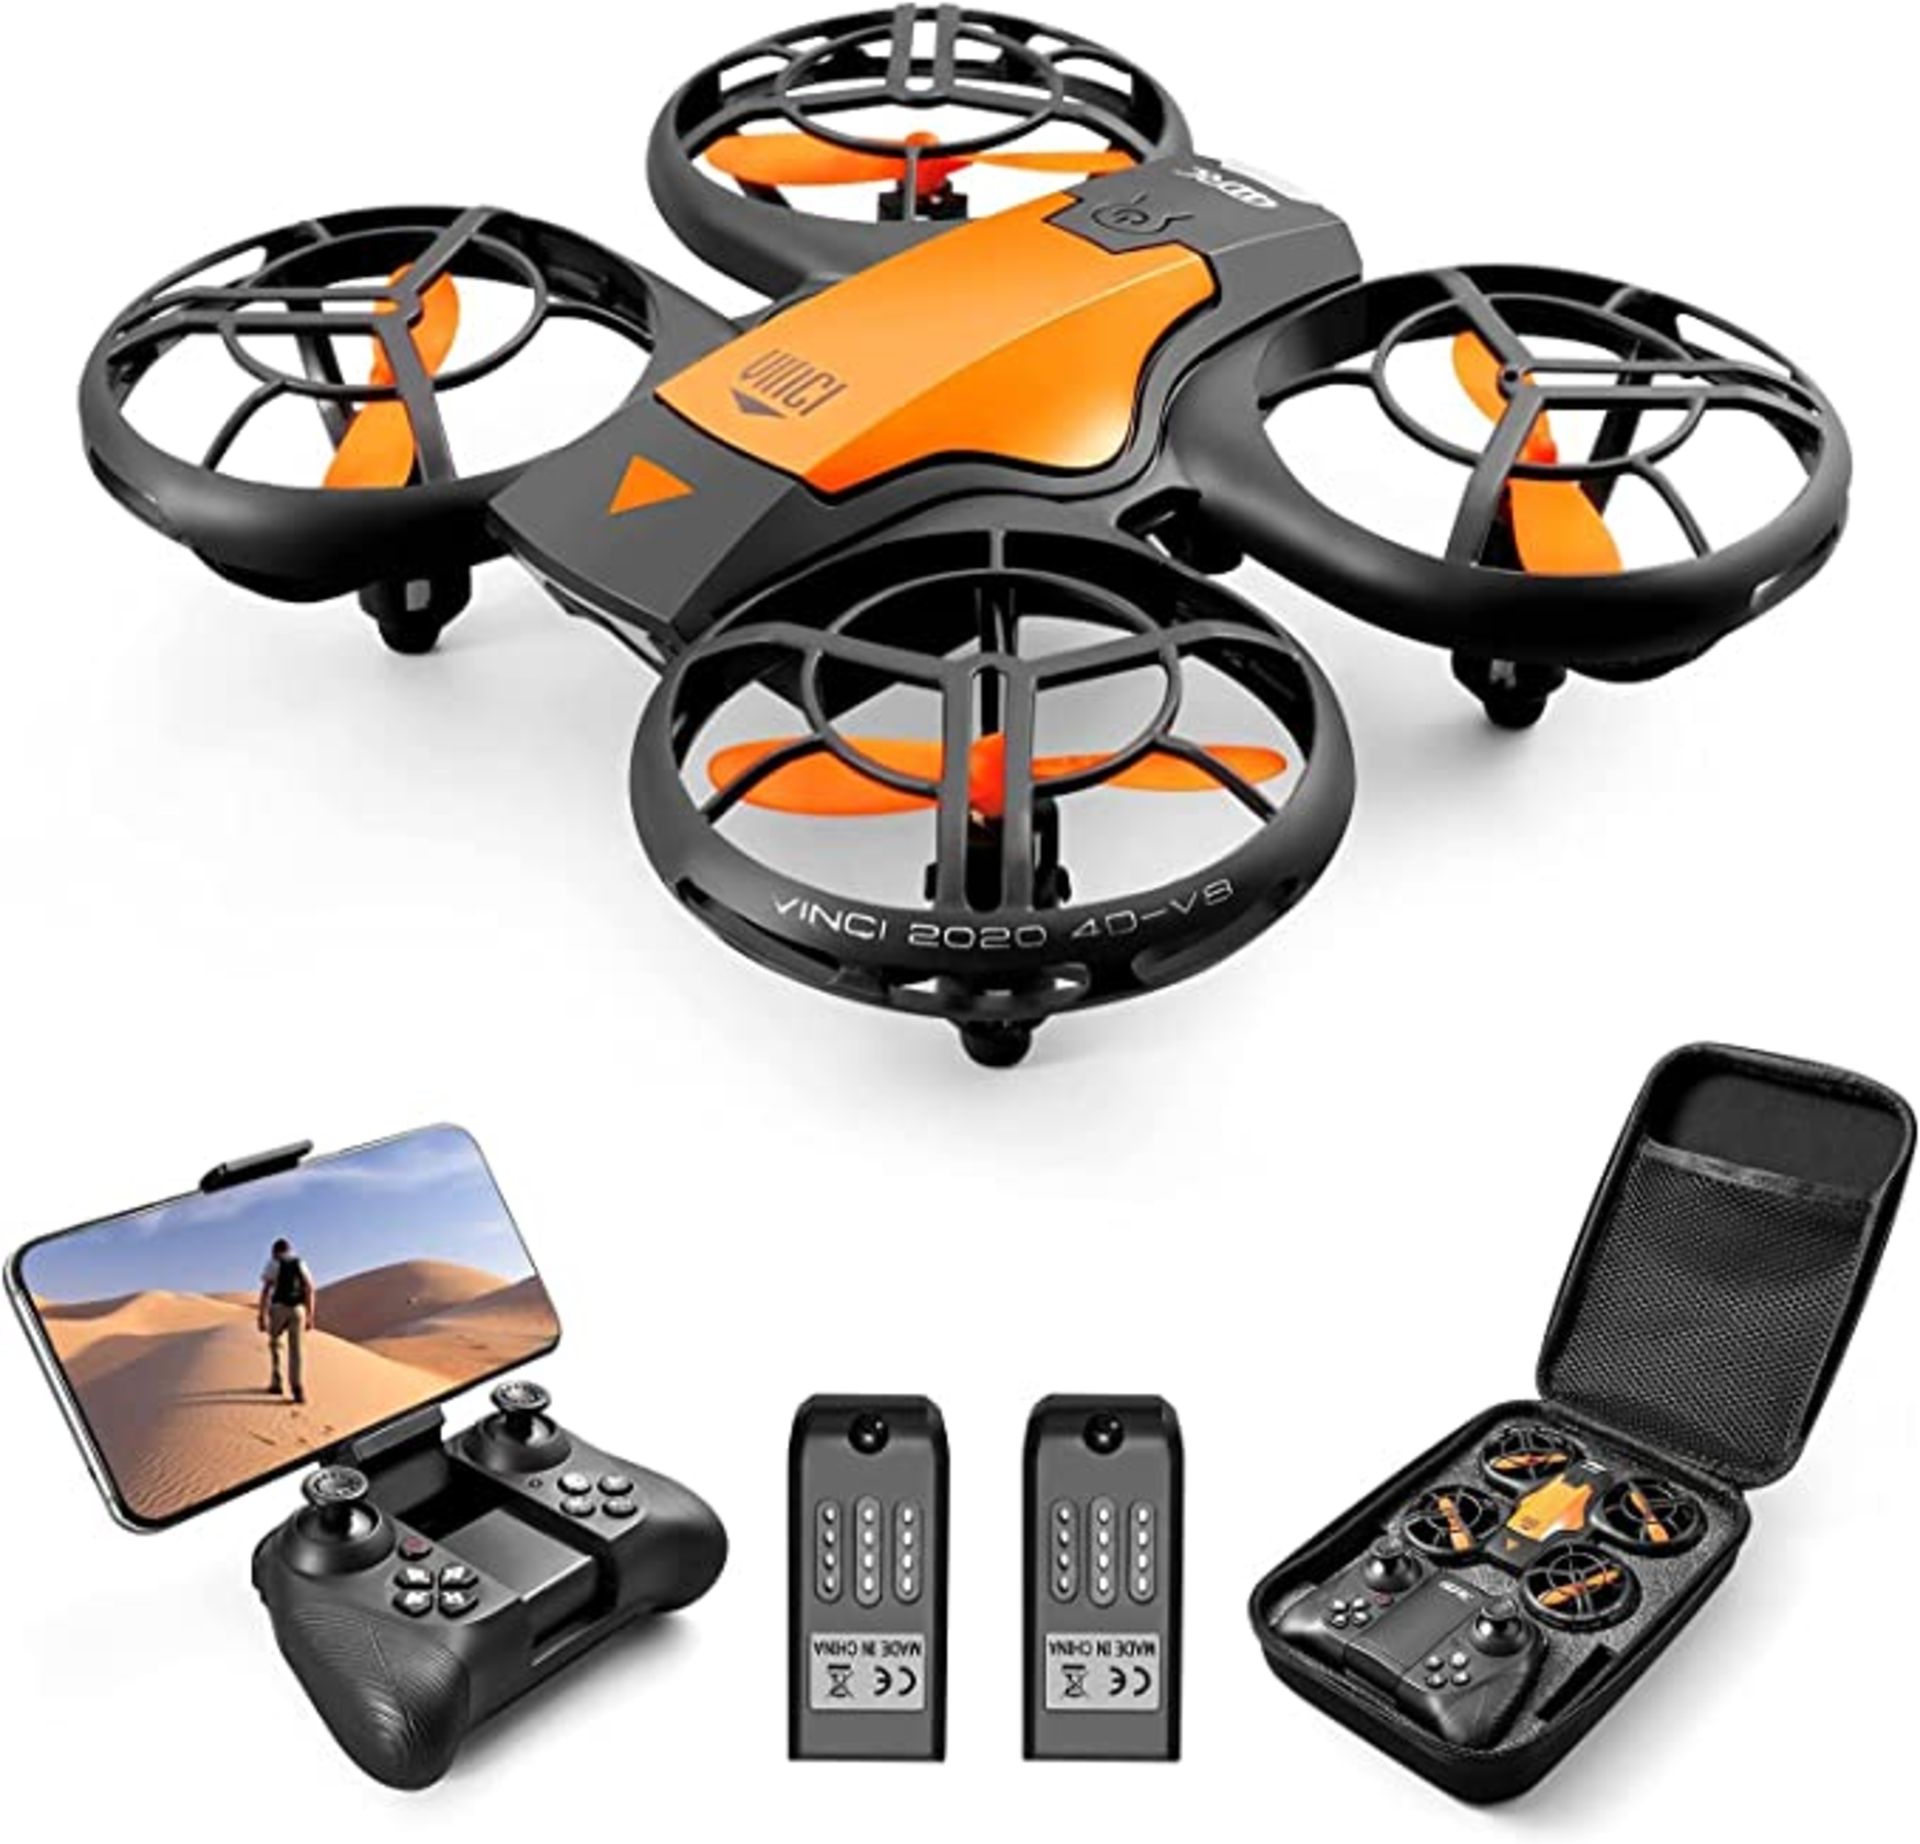 TRADE LOT TO CONTAIN 10 X 4DRC Mini Drone With 720P HD Camera For Kids, FPV 2.4G WiFi, Upgraded